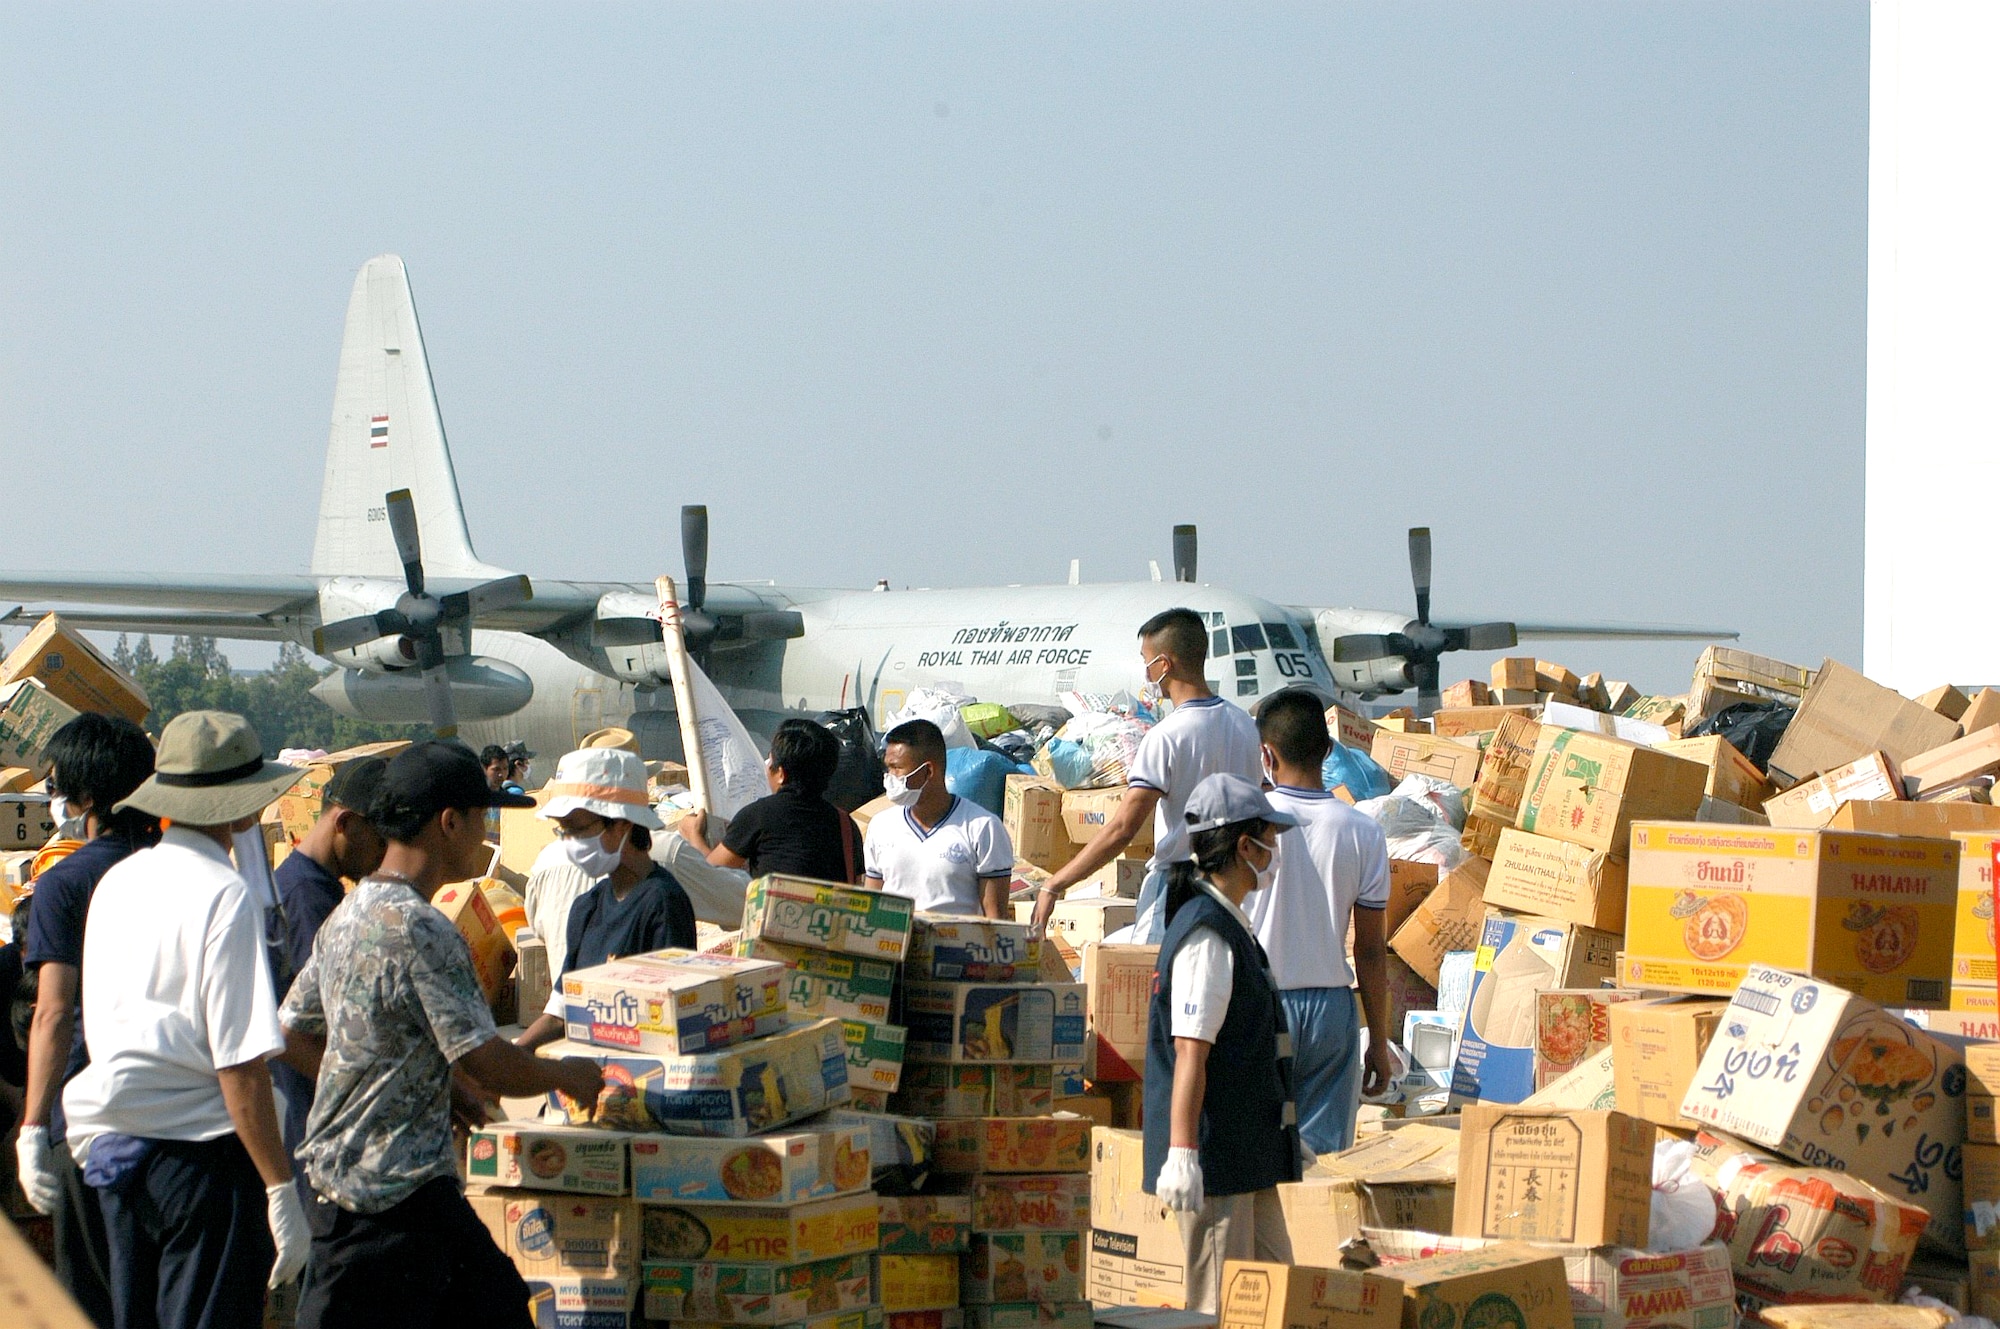 BANGKOK, Thailand -- Volunteers organize a sea of relief supplies between two hangars at the international airport here Jan. 1. (U.S. Air Force photo by Master Sgt. Michael Farris)